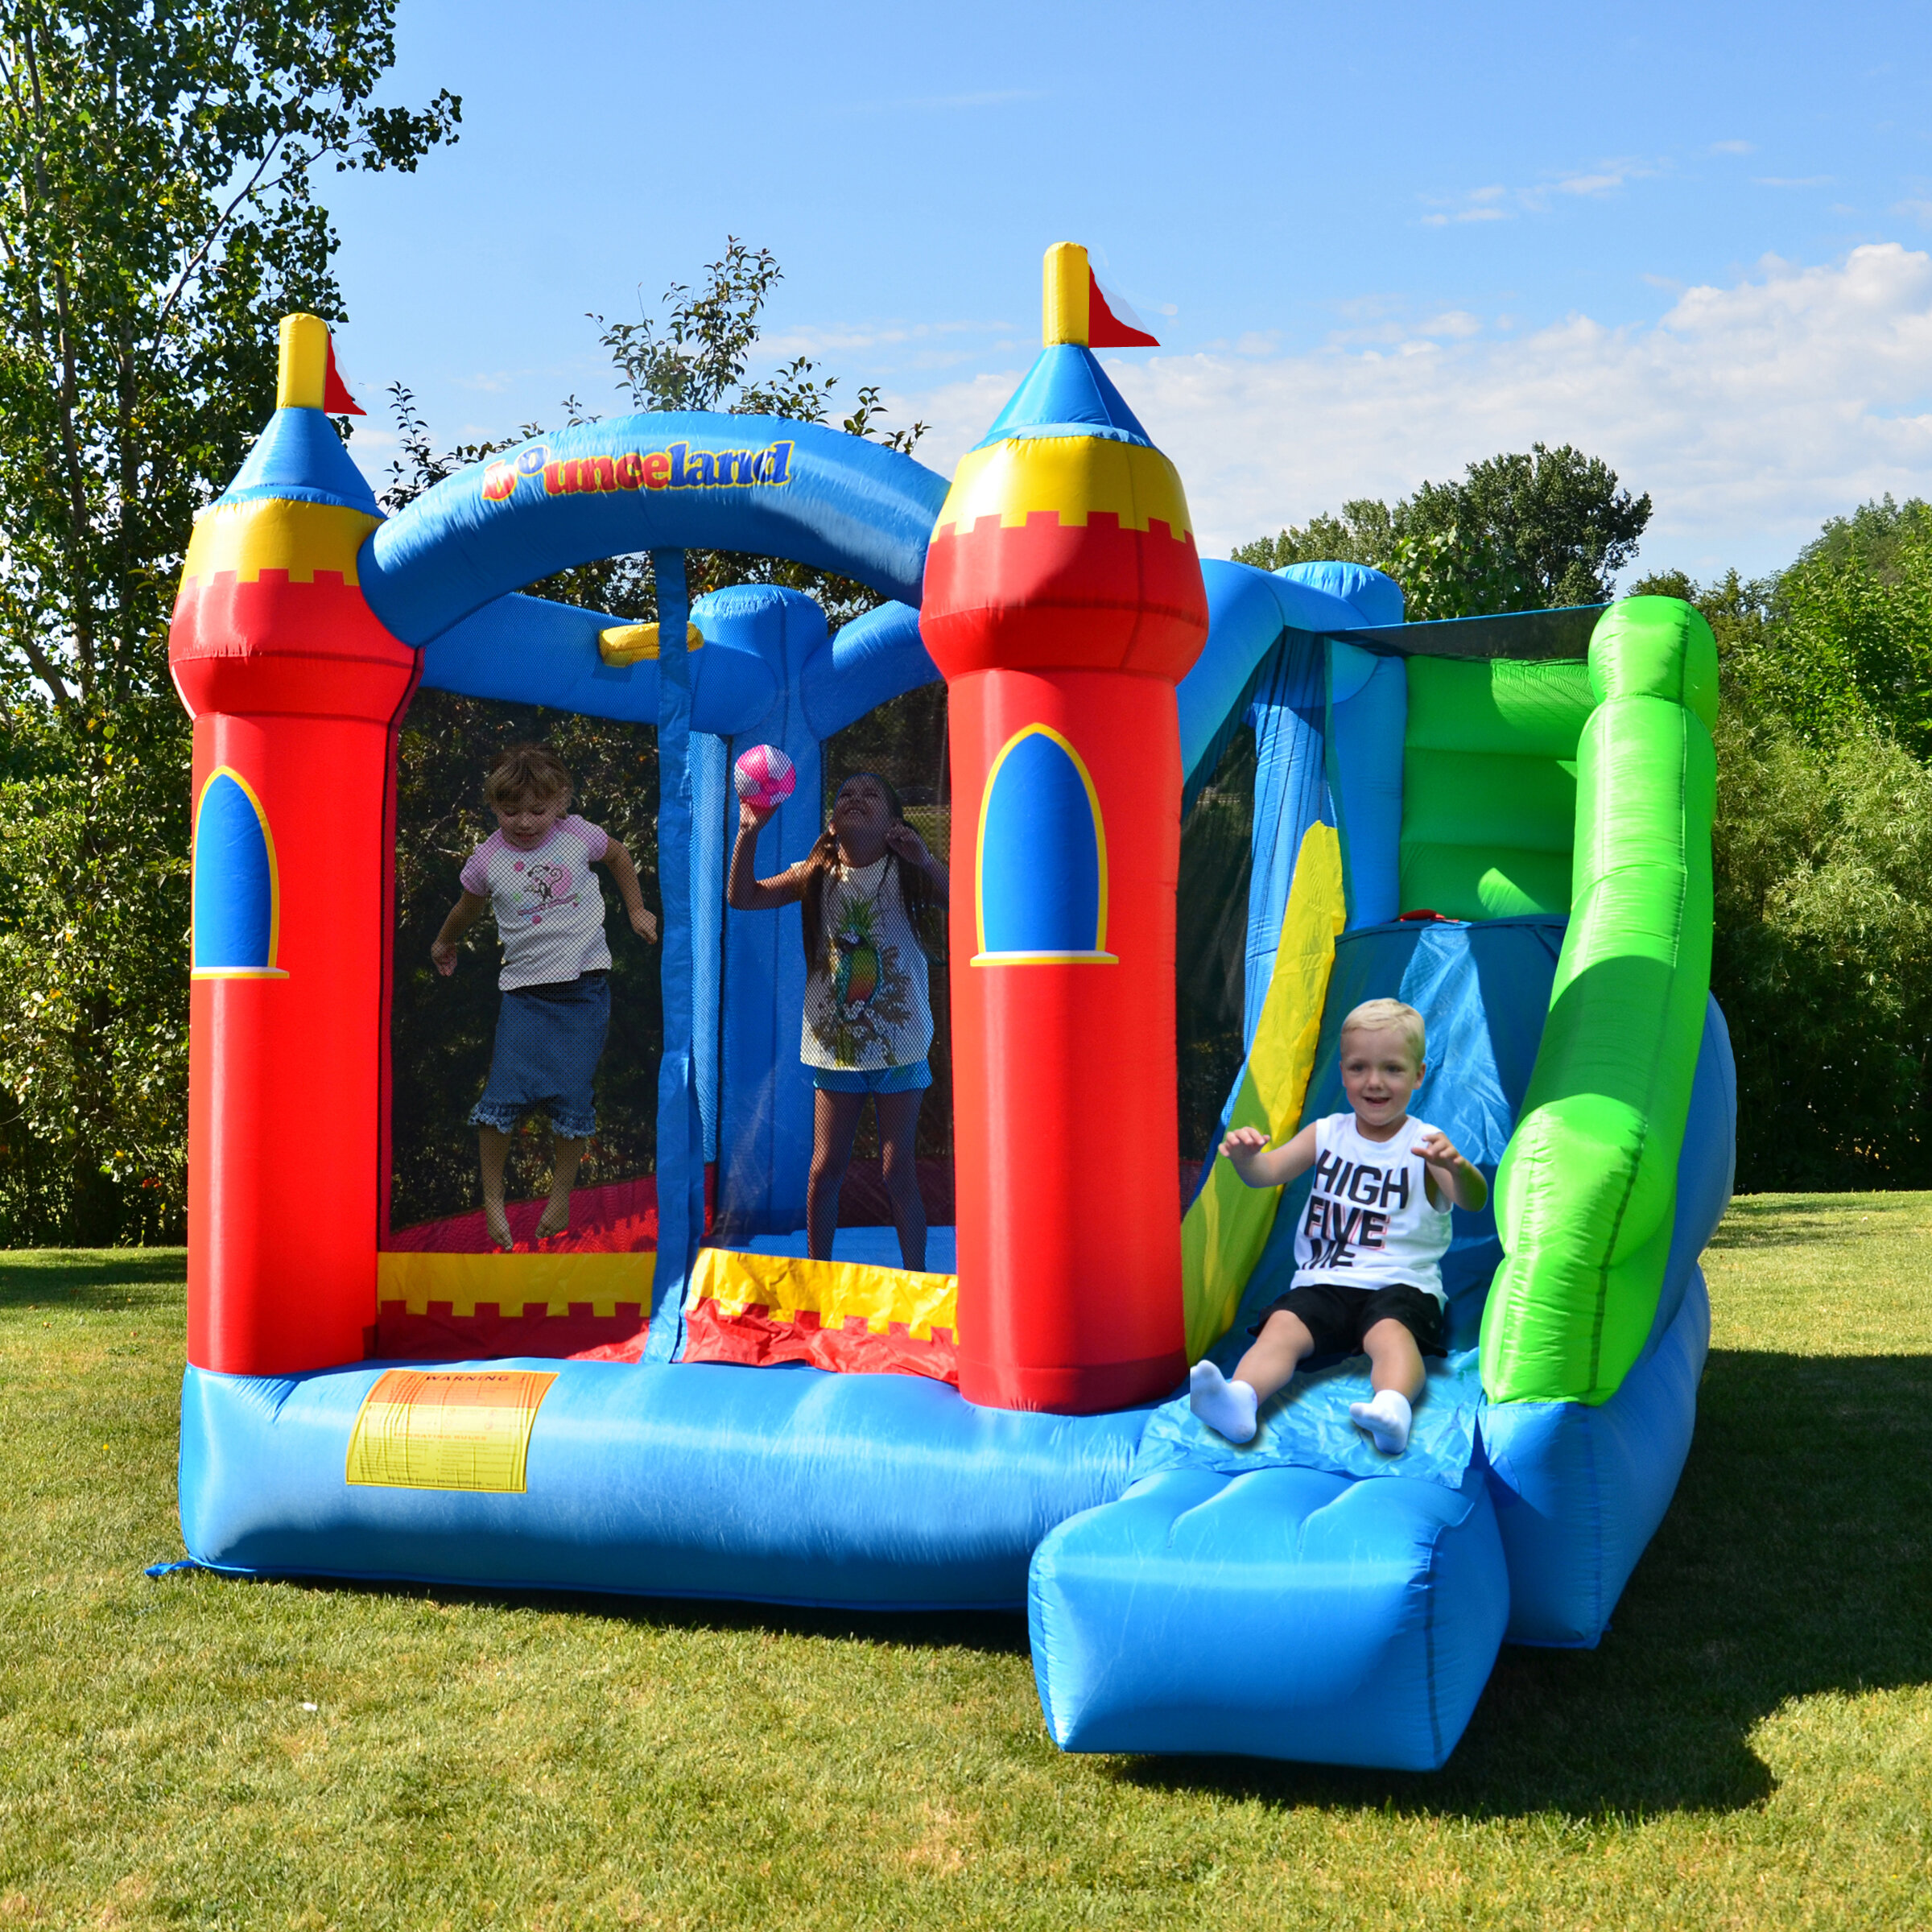 Details about   Safe Inflatable Bounce House Castle Kids Slide Jumper Bouncer Room with Blower 